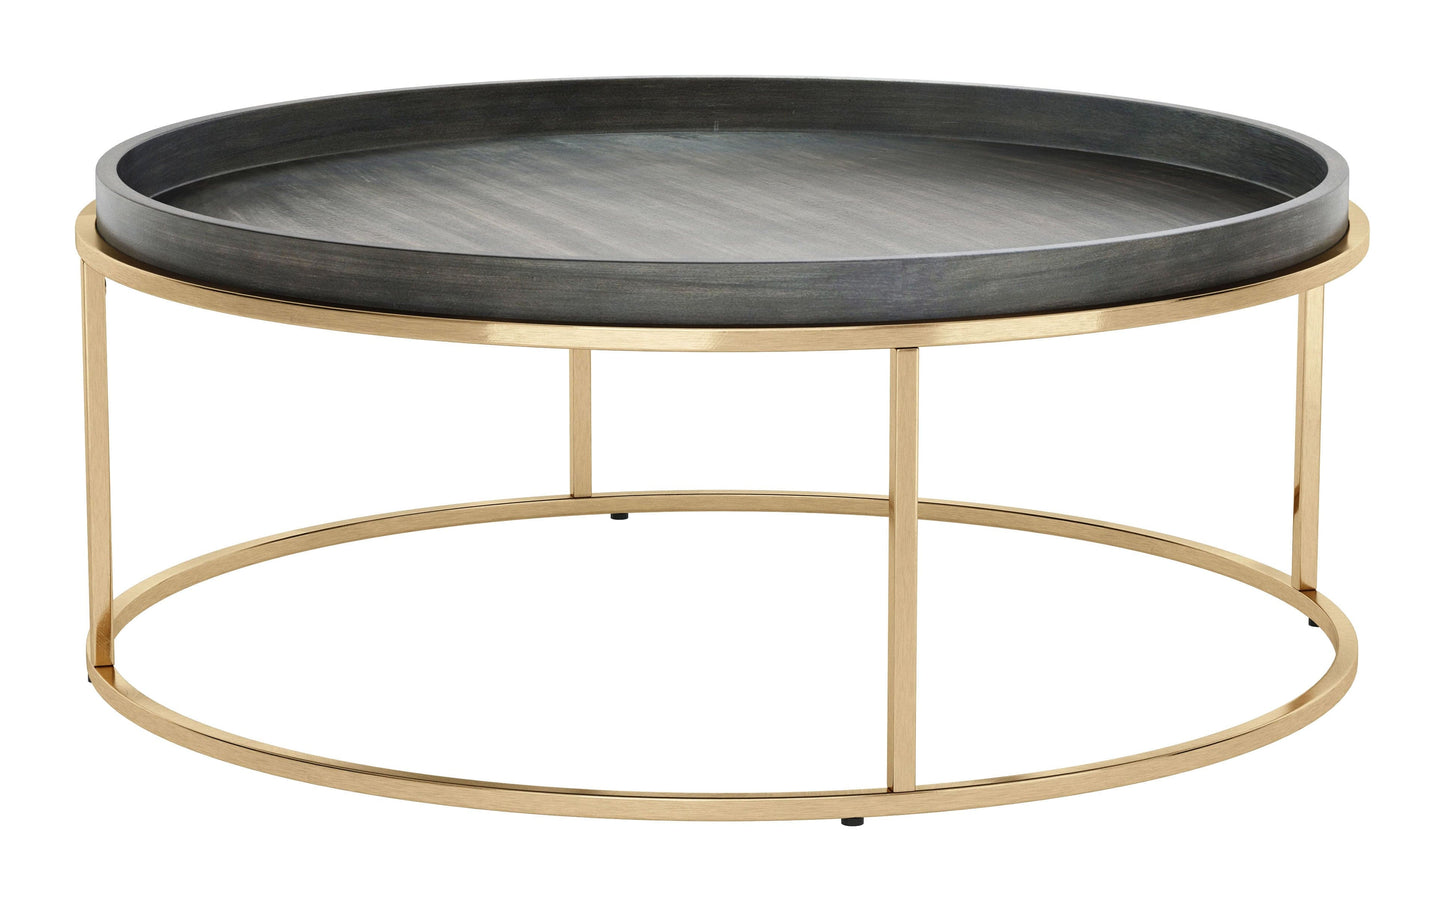 Modern glam accent table